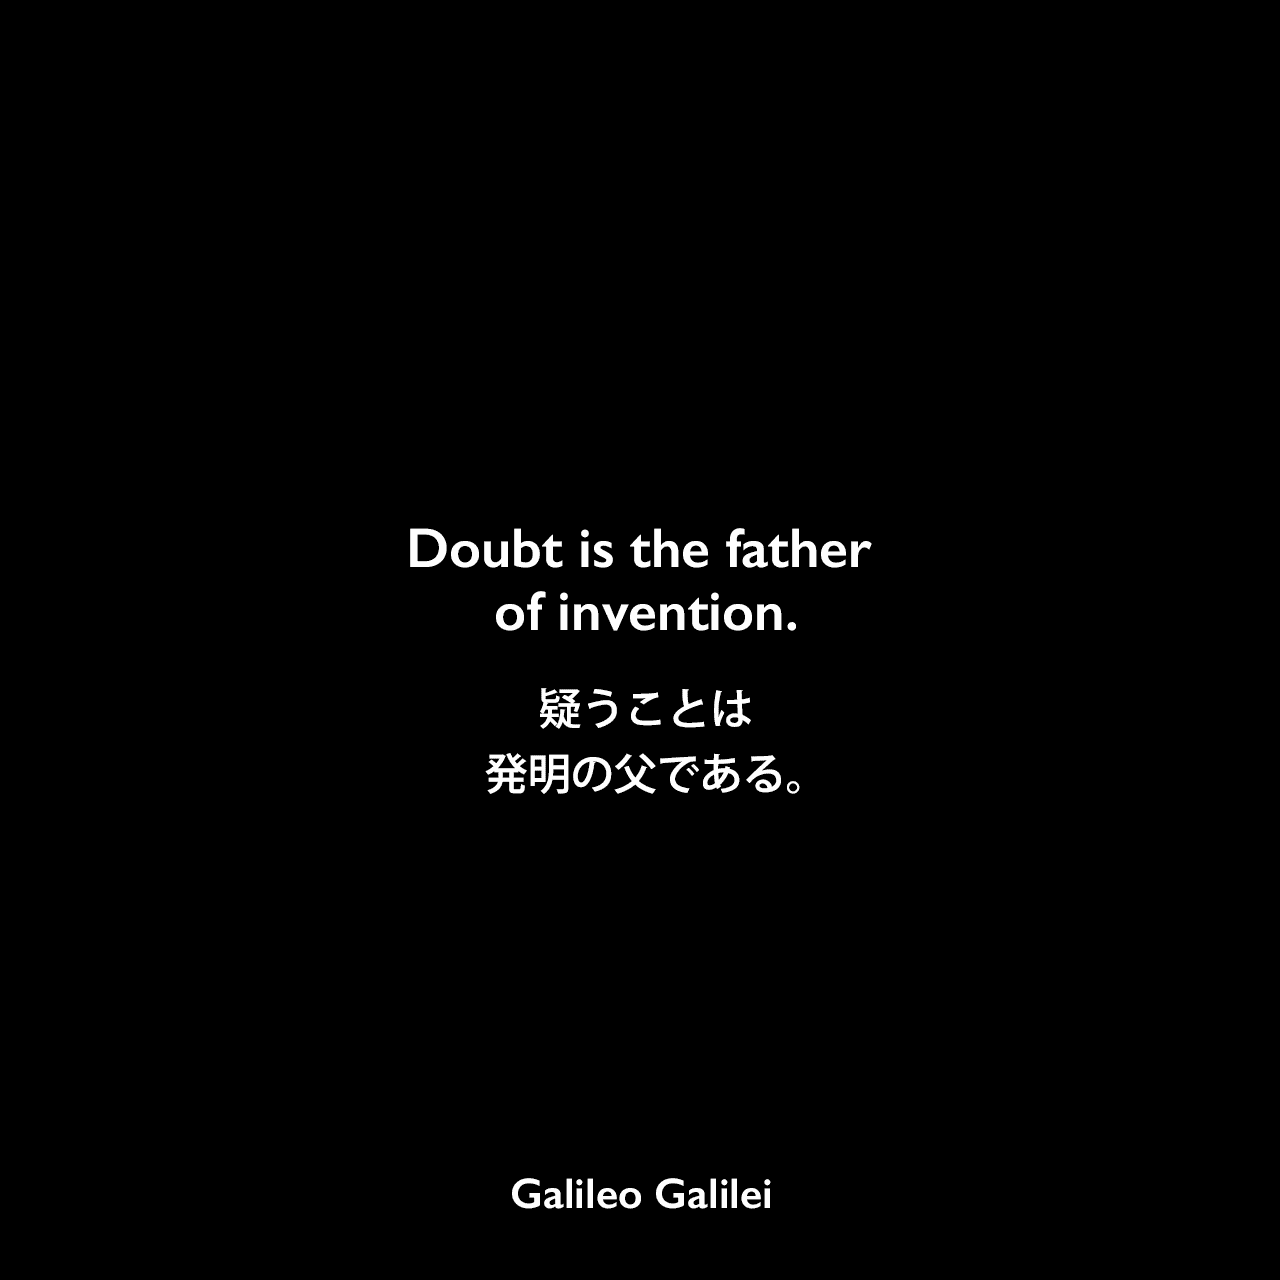 Doubt is the father of invention.疑うことは発明の父である。Galileo Galilei